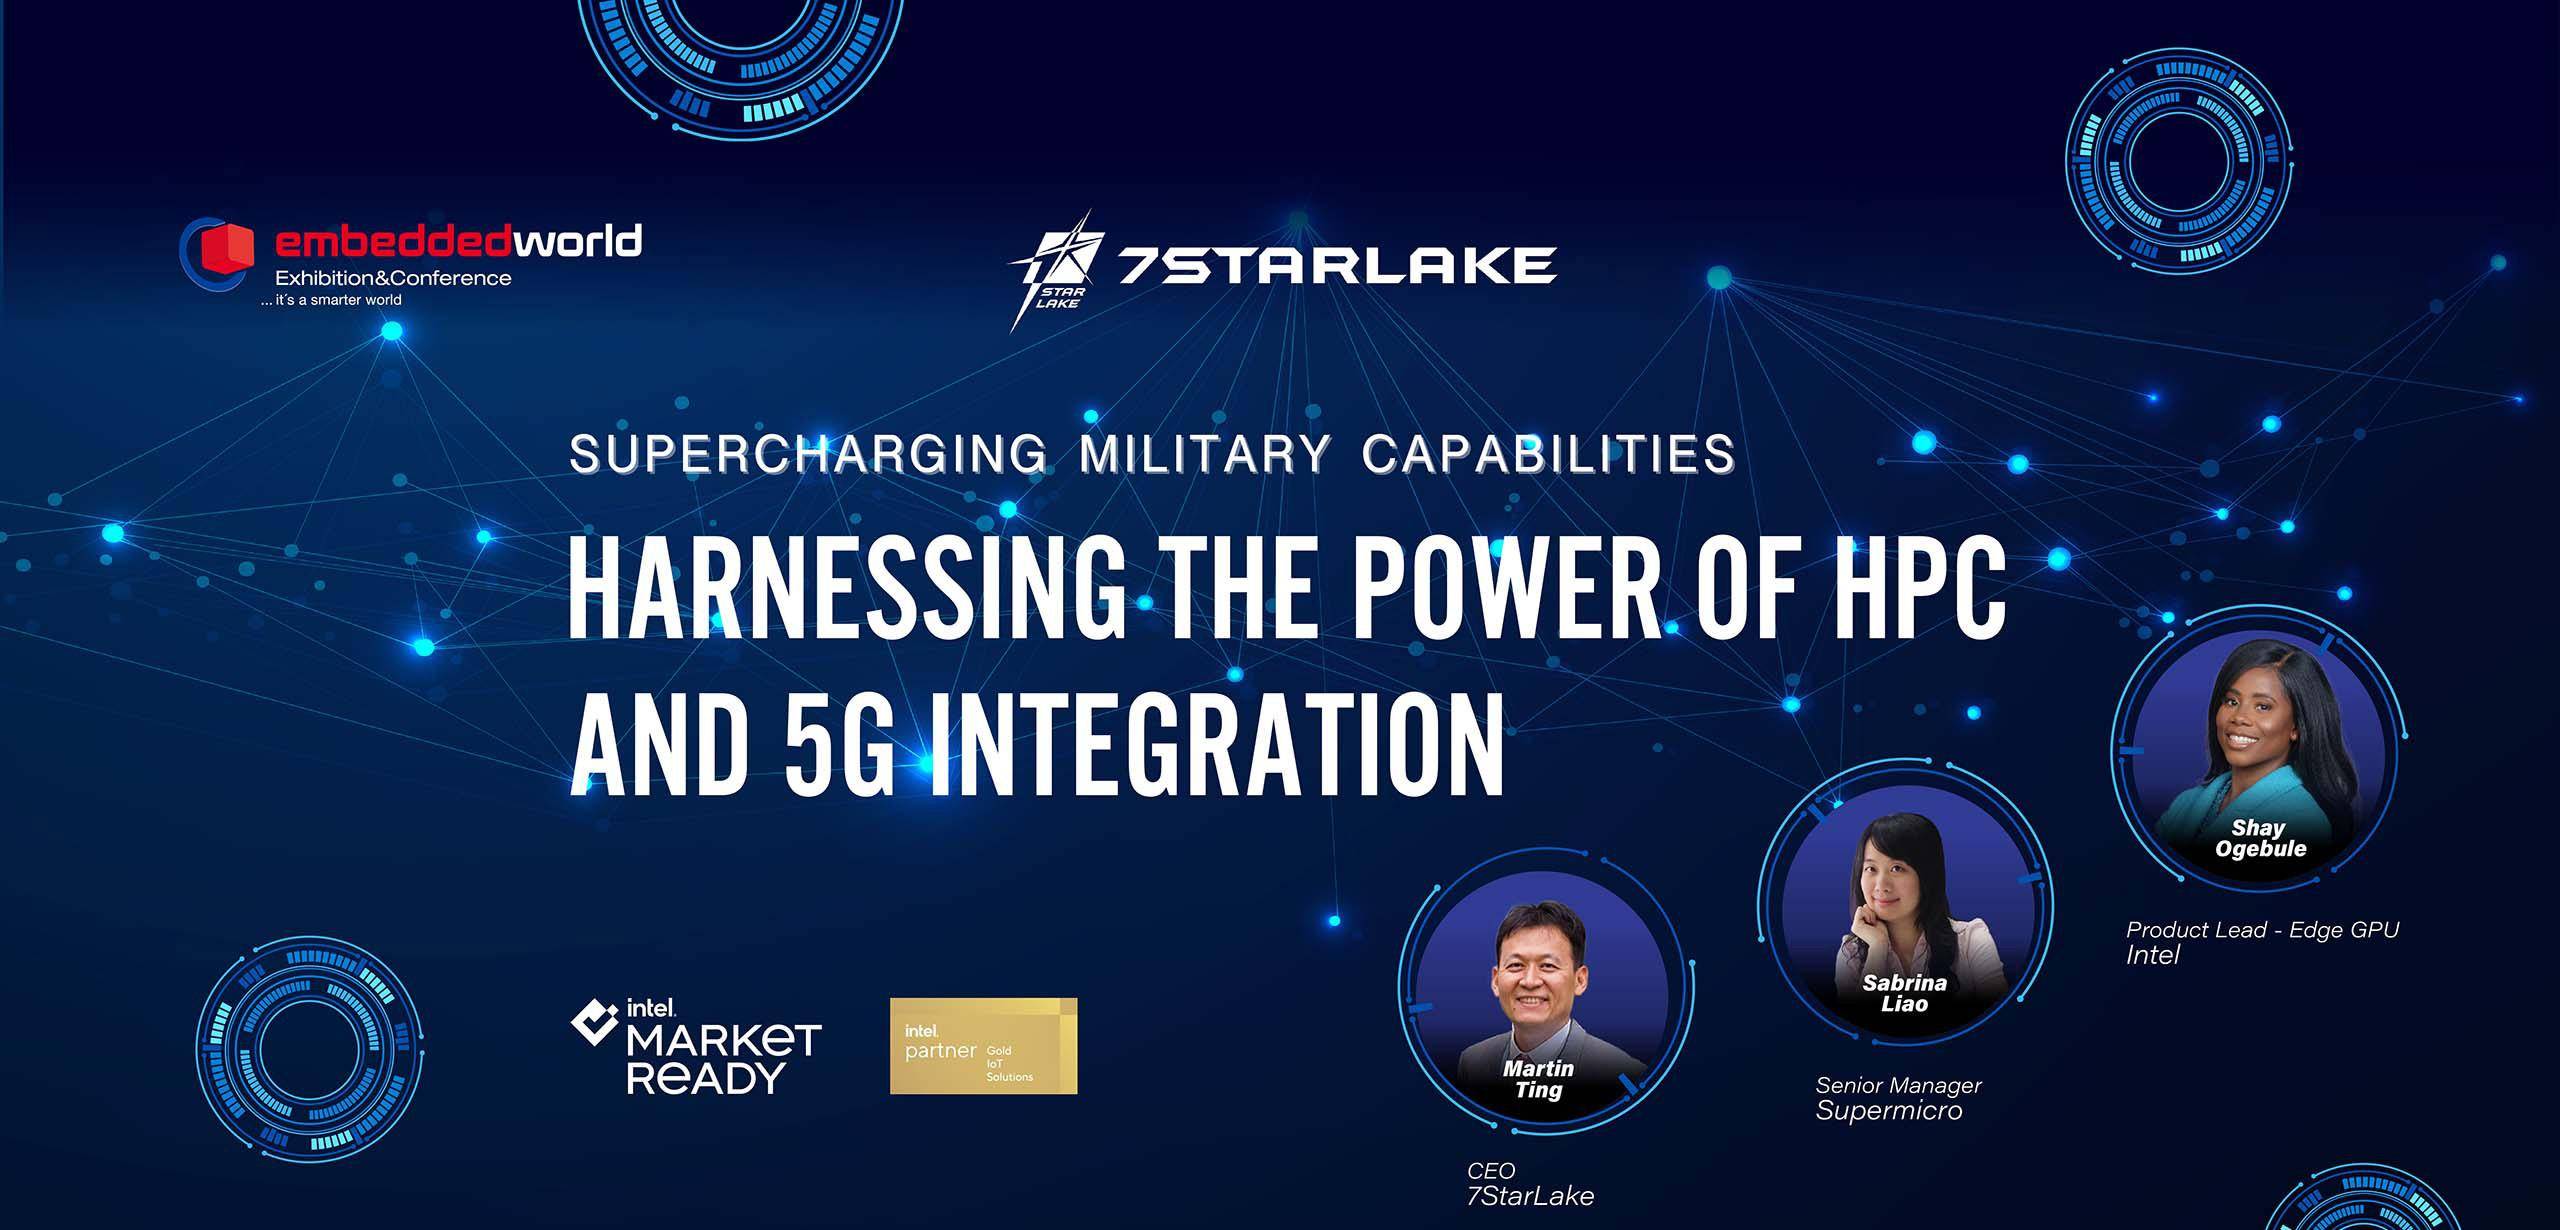 Supercharging Military Capabilities: Harnessing the Power of HPC and 5G Integration